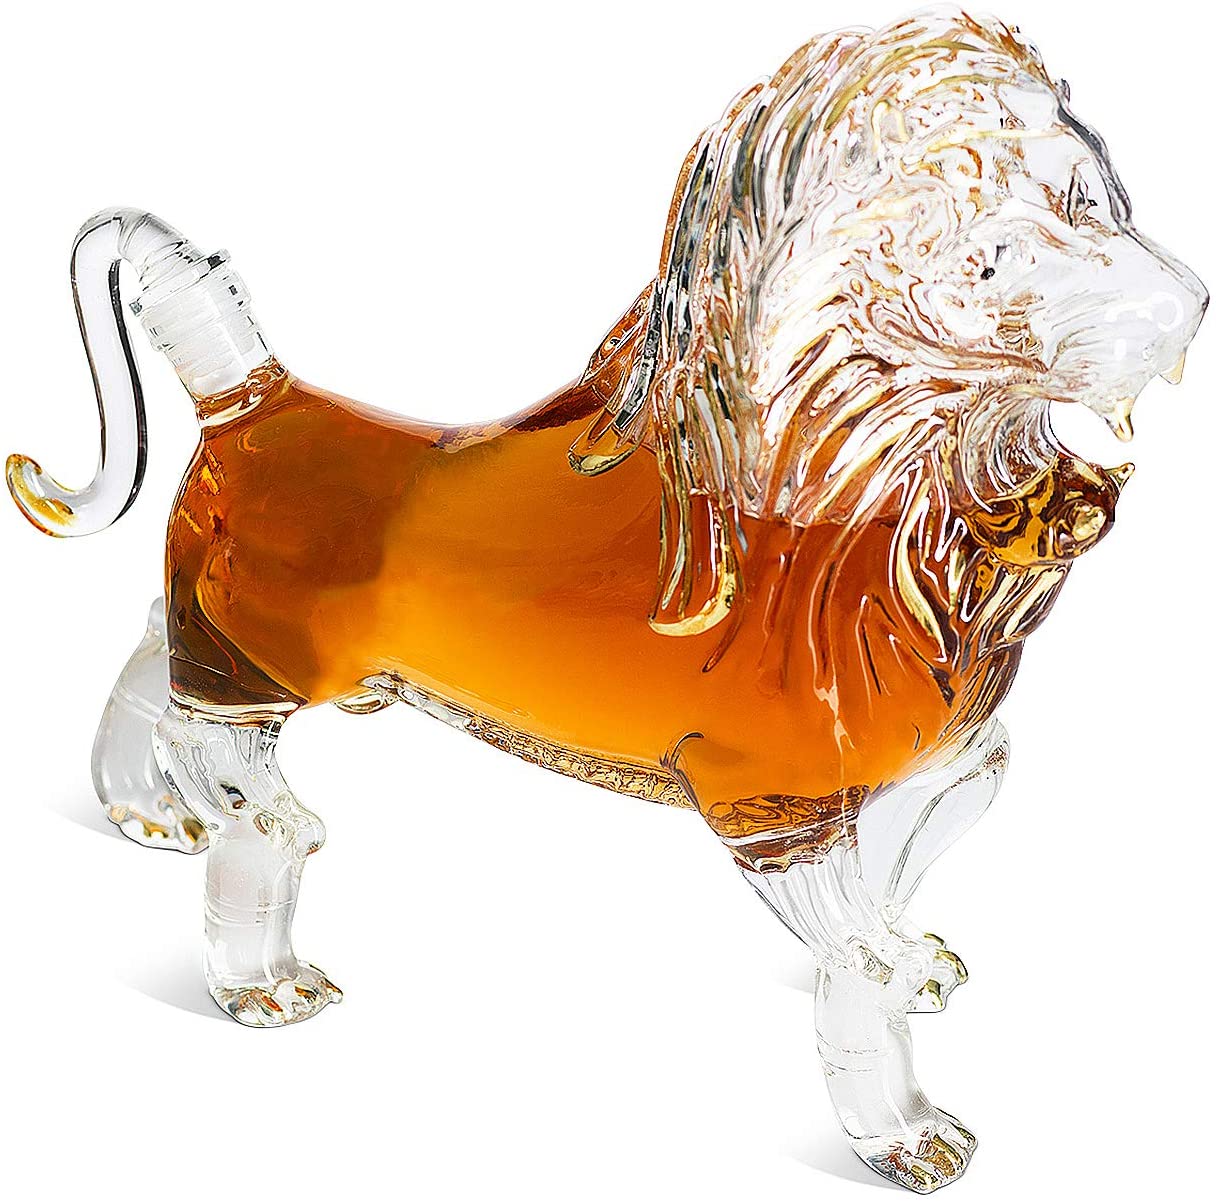 Lion Animal Whiskey and Wine Decanter Liquor Lux - Beautiful Profile of A Lion 500ml - Whiskey, Wine Scotch or Liquor Decanter